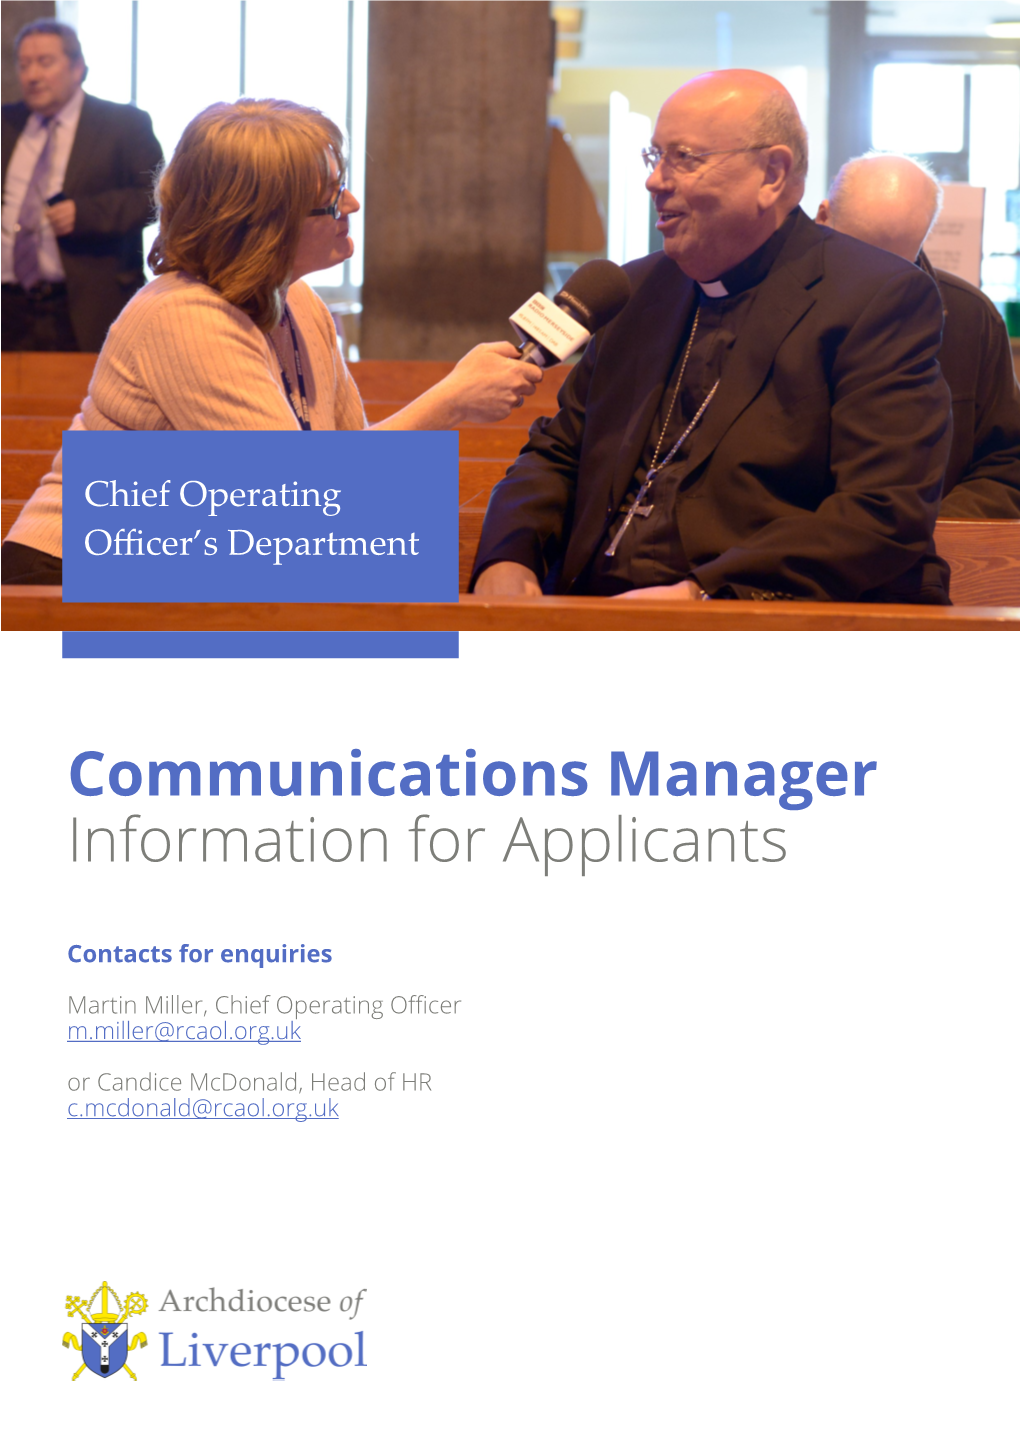 Communications Manager Information for Applicants